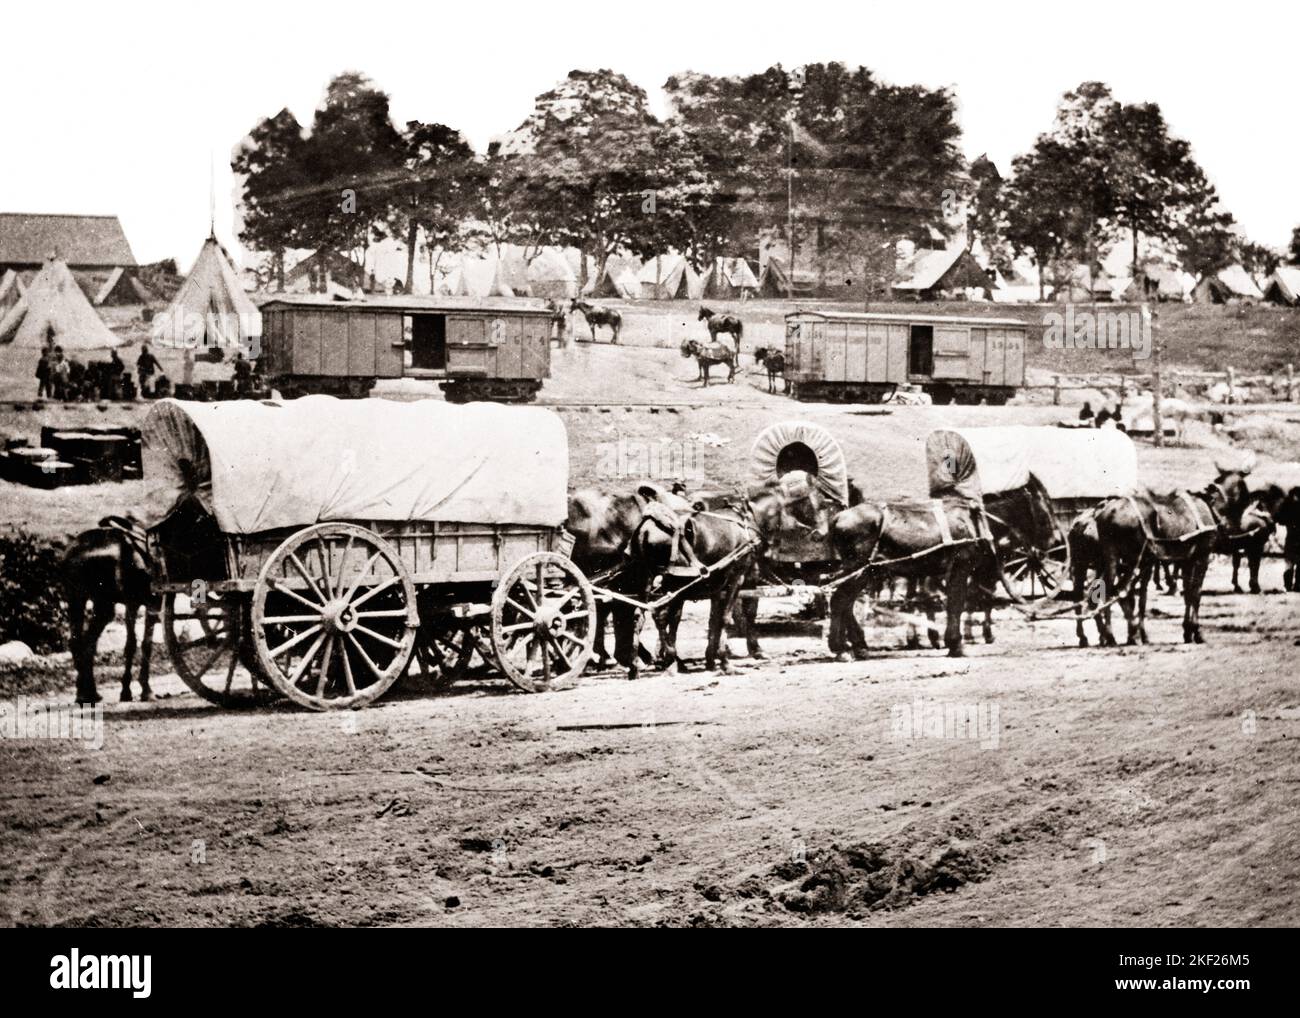 1800s 1860s A BAGGAGE TRAIN AND SIX MULE WAGONS AT A UNION FEDERAL CAMP AMERICAN CIVIL WAR  - h8892 SPL001 HARS UNION AND EXCITEMENT LOW ANGLE TENTS UNIFORMS MULES 1860s WAGONS RAILROADS COOPERATION COVERED WAGONS MAMMAL MULE SOLUTIONS AMERICAN CIVIL WAR BAGGAGE BATTLES BLACK AND WHITE CIVIL WAR CONFLICTS FEDERAL OLD FASHIONED Stock Photo